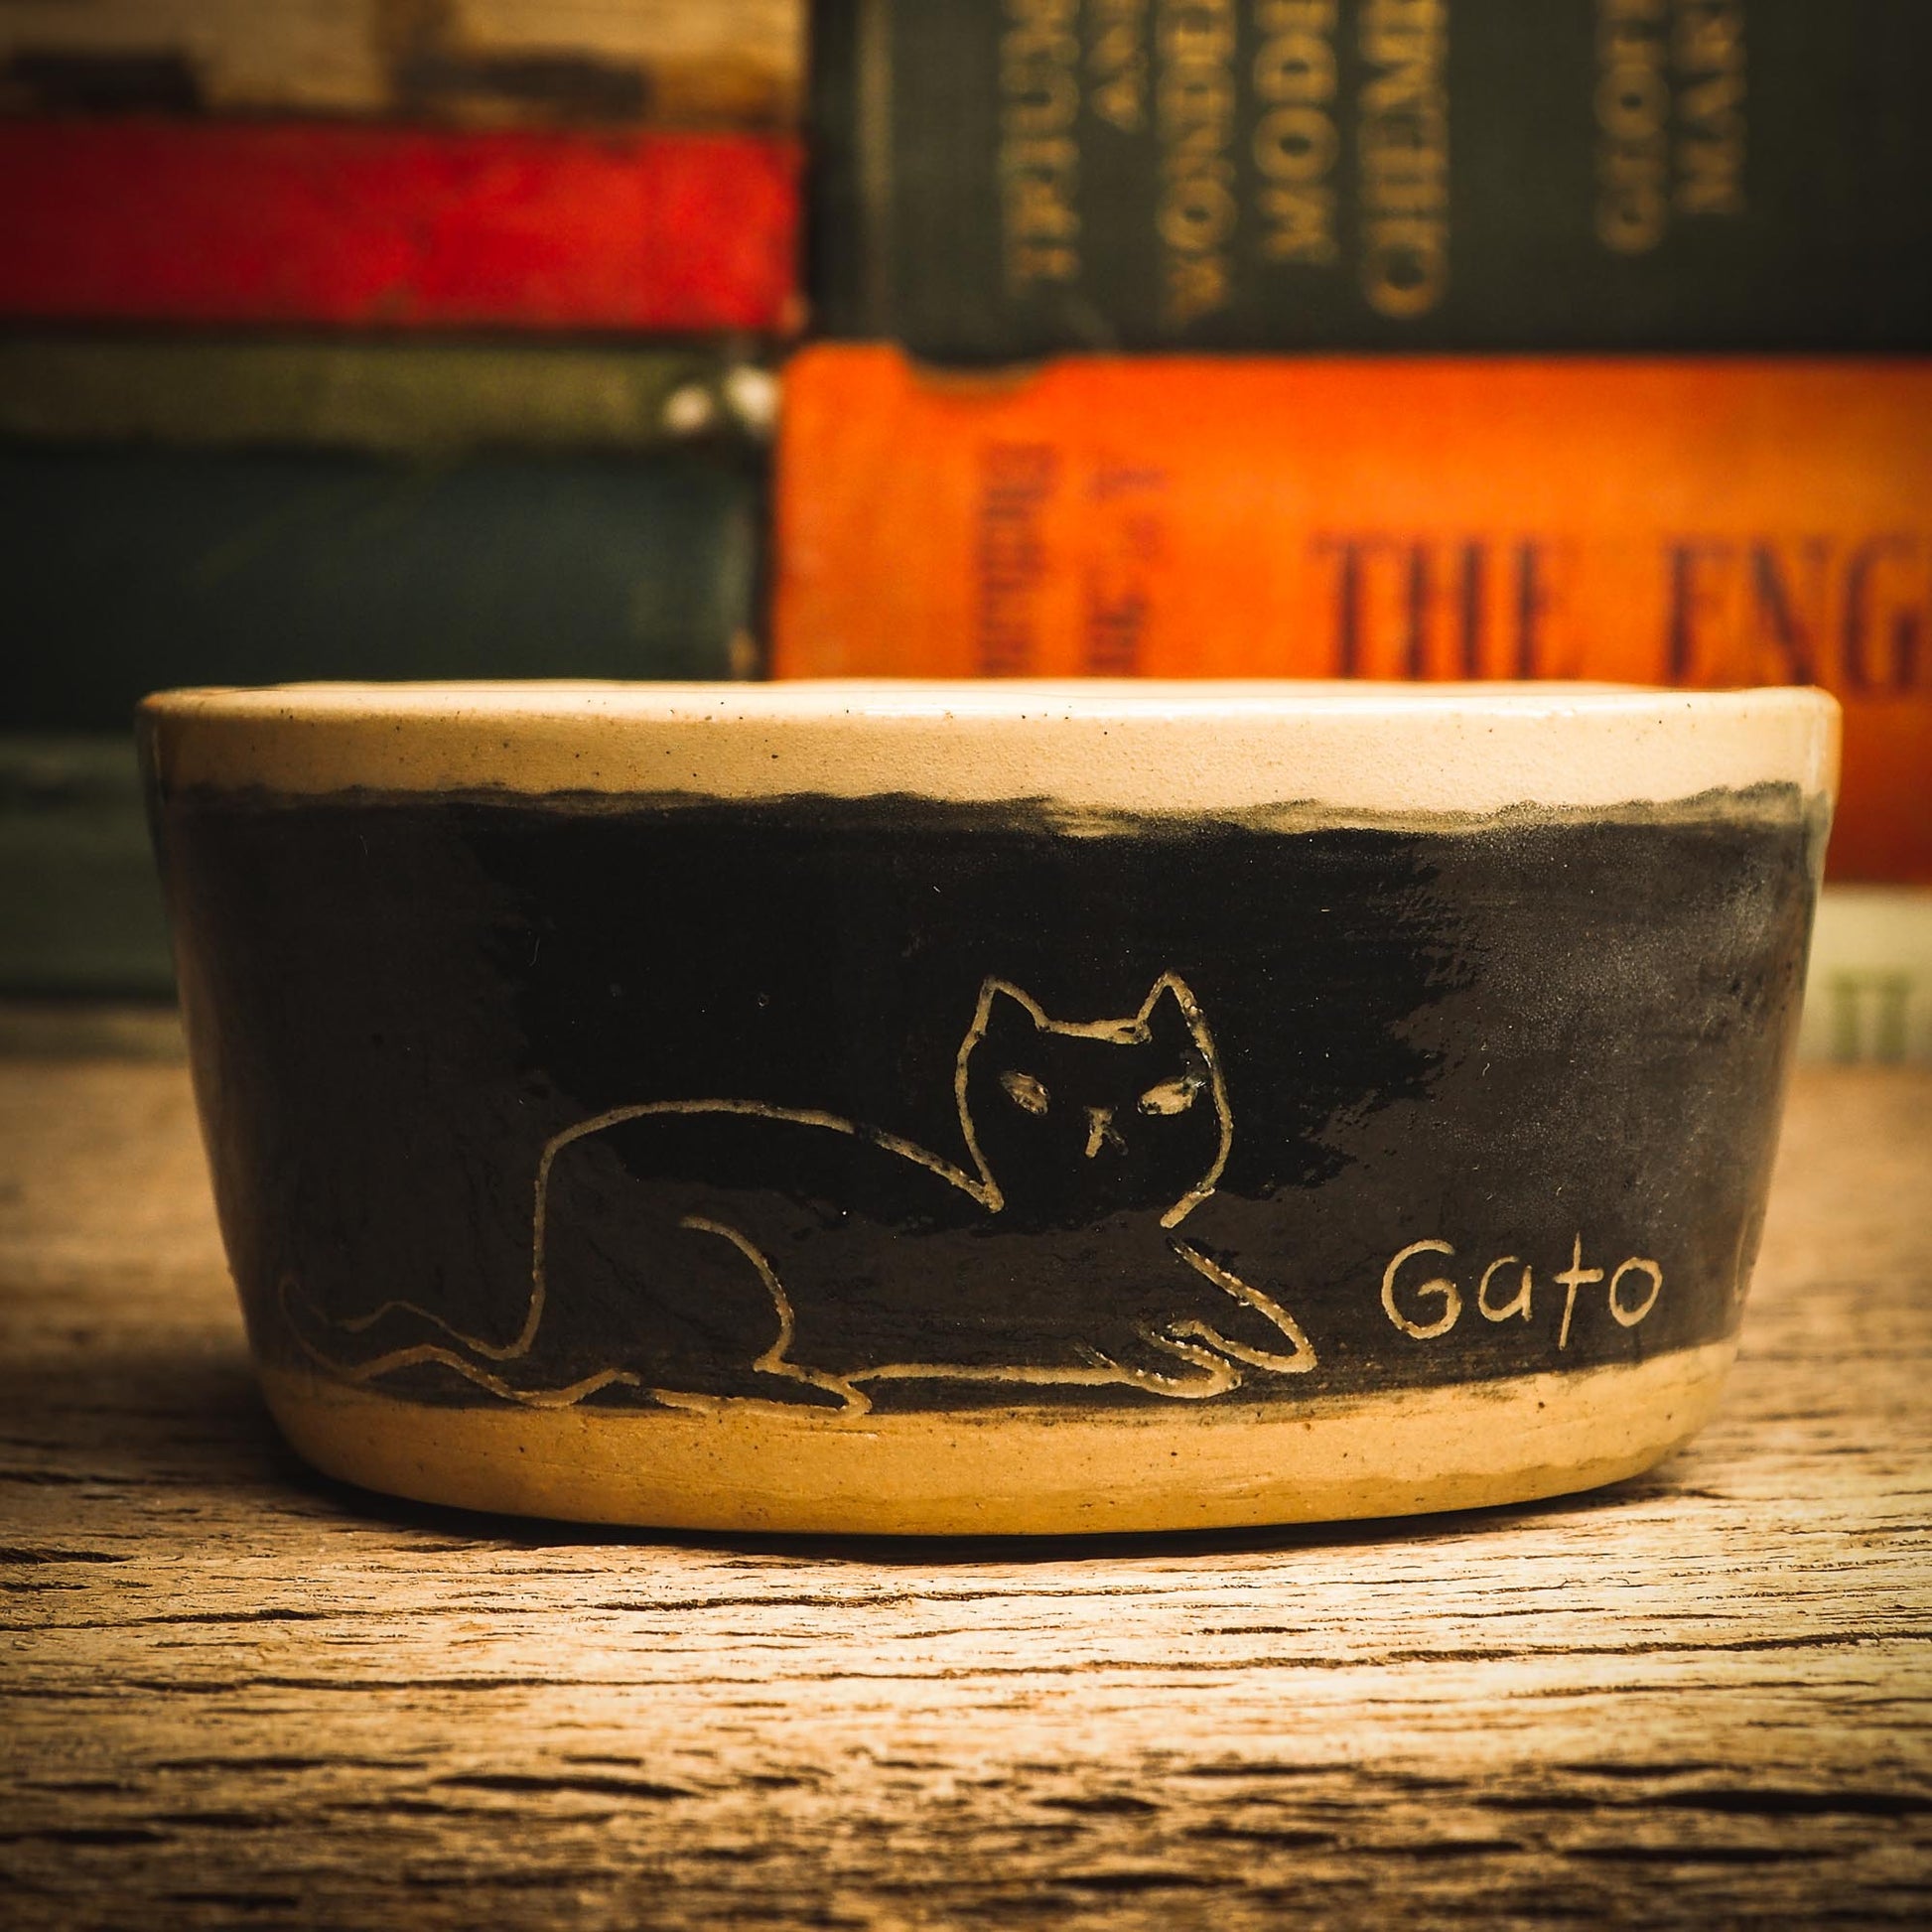 An original handmade fired stoneware ceramic art piece by Idania Salcido, the artist behind Danita Art. A Halloween themed bowl perfect for enjoying ice cream and fruit slices, or to be used as a fancy, one of a kind pet food bowl. Danita's exclusive line of housewares and hand made home decor will create beautiful memories for you.